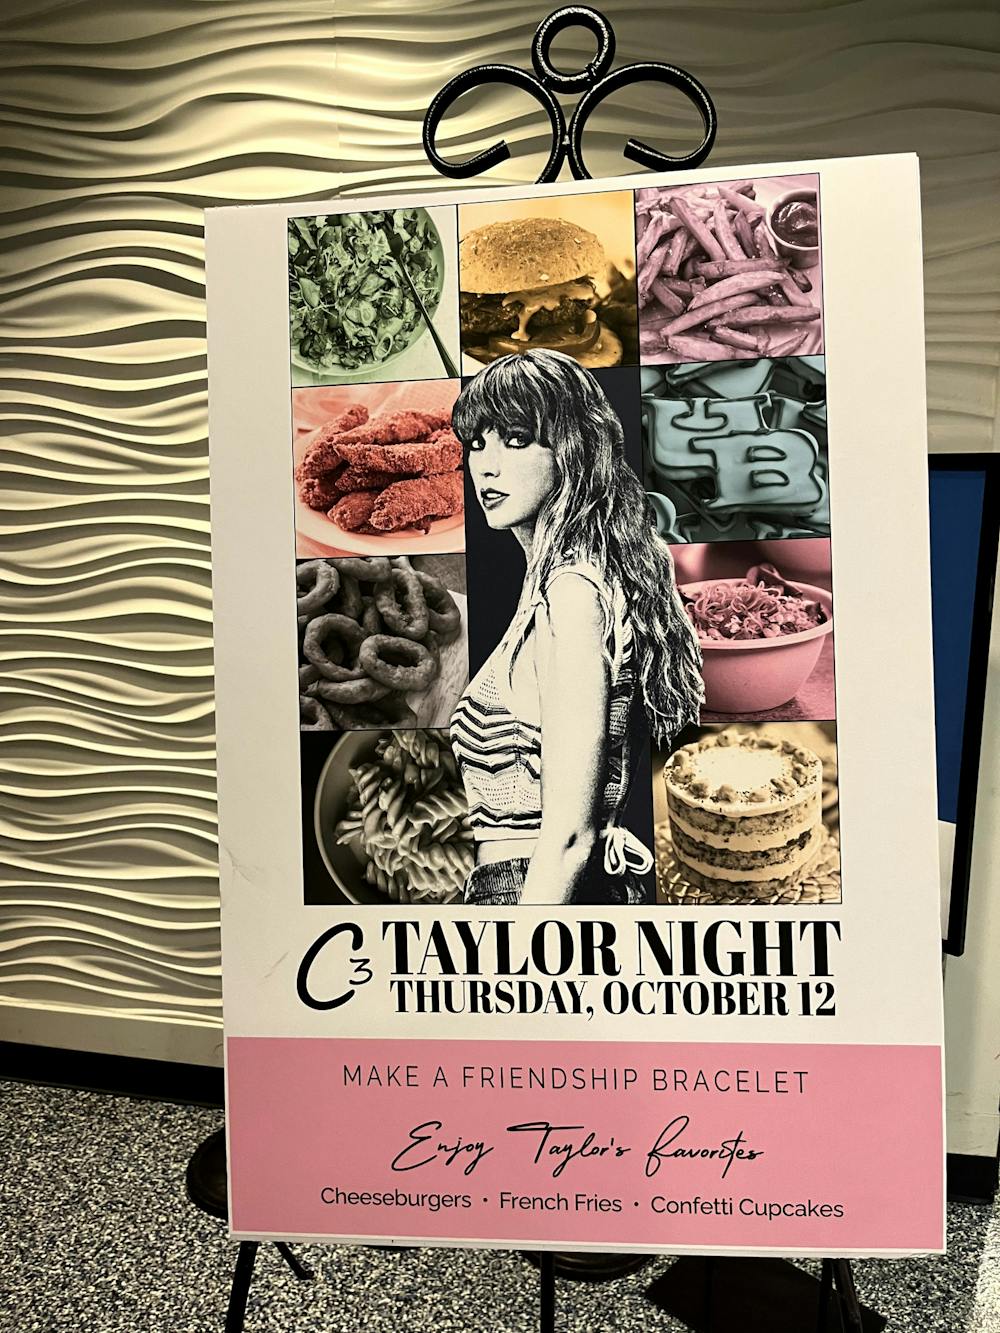 <p>C3 dining hall hosted "Taylor Swift night" on Thursday, Oct. 12.</p>